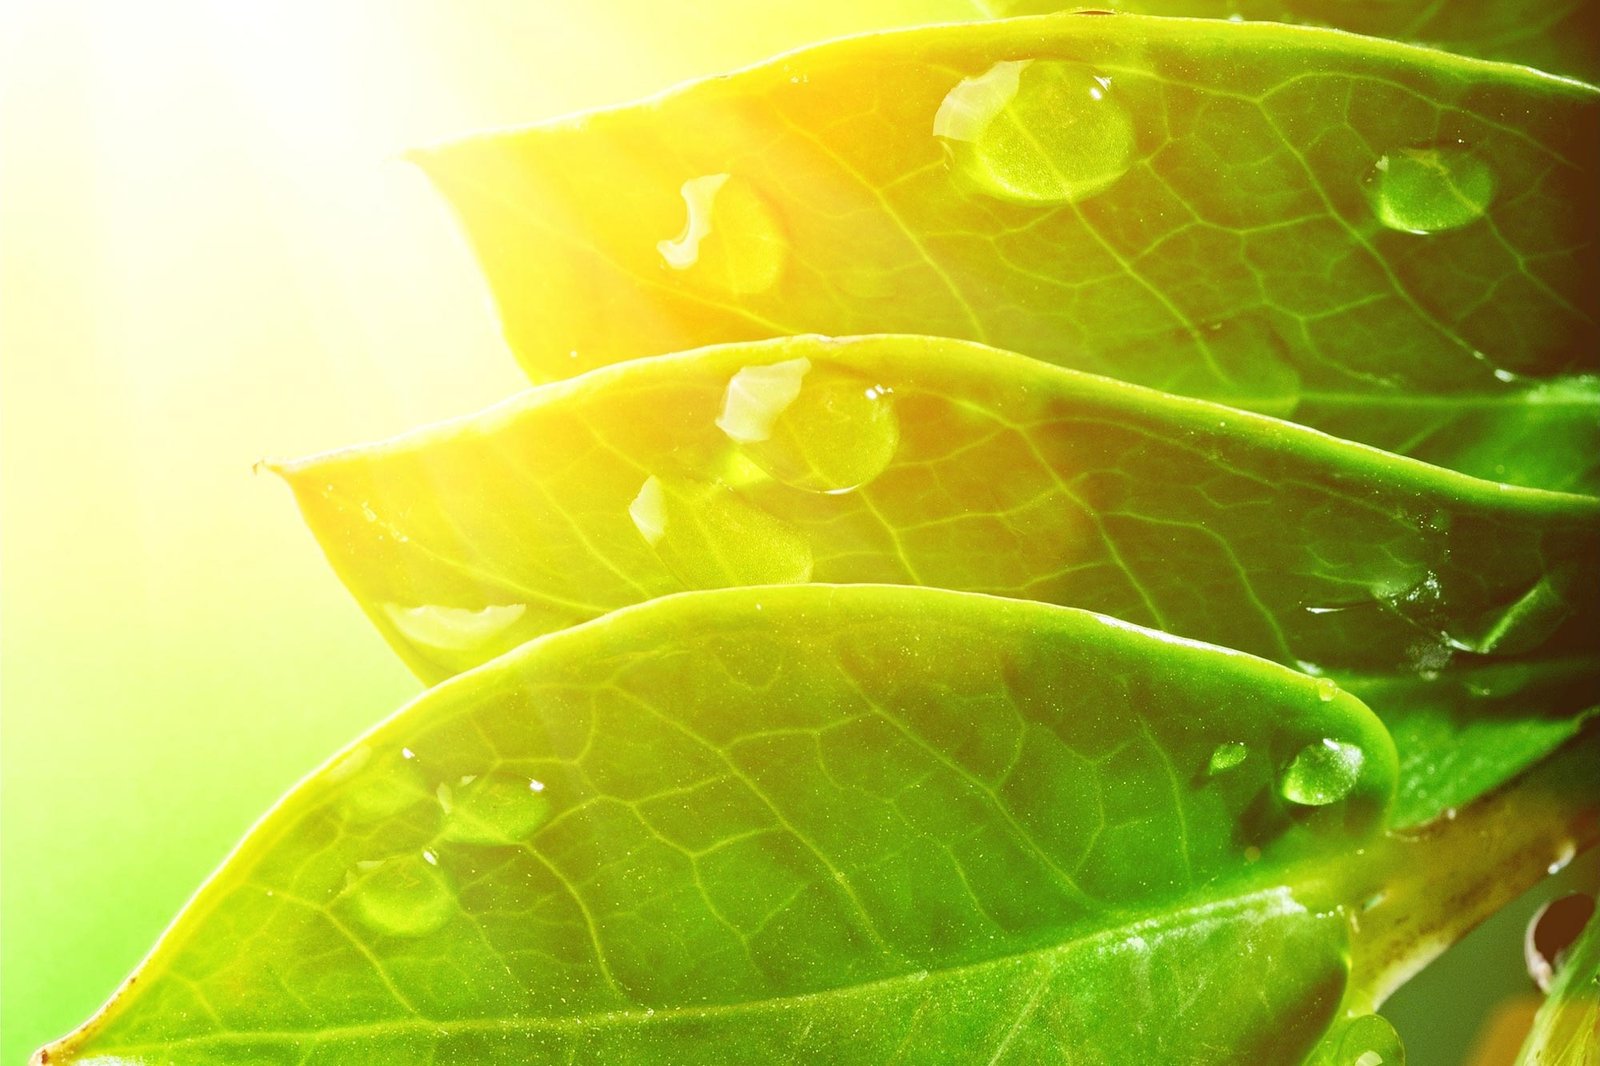 Key Carboxysome Discovery Brings Scientists a Giant Step Closer to Supercharged Photosynthesis